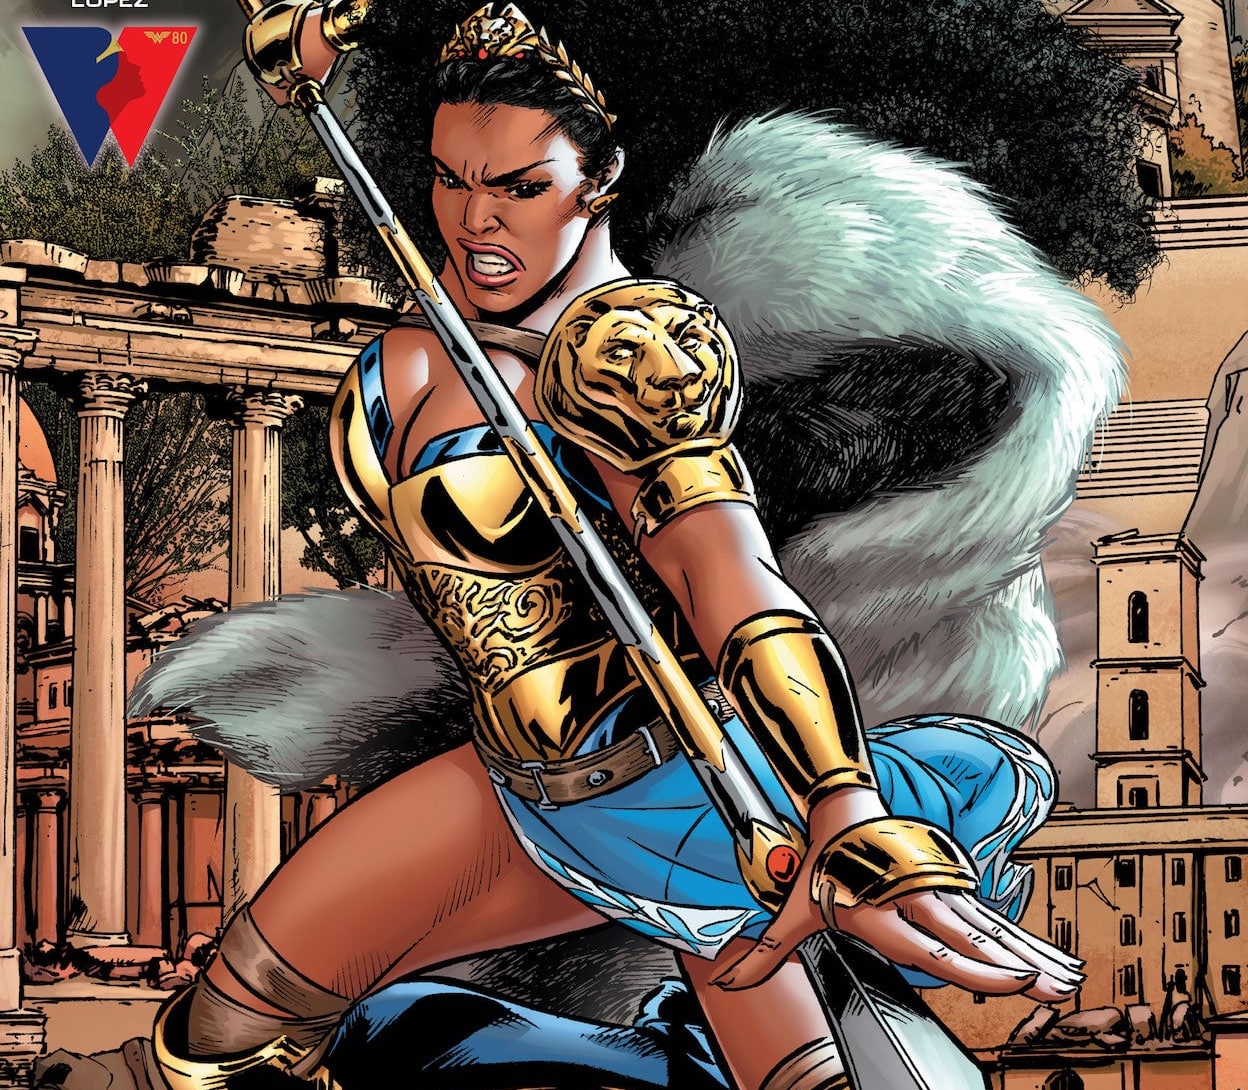 'Nubia and the Amazons' #1 could be a game-changer